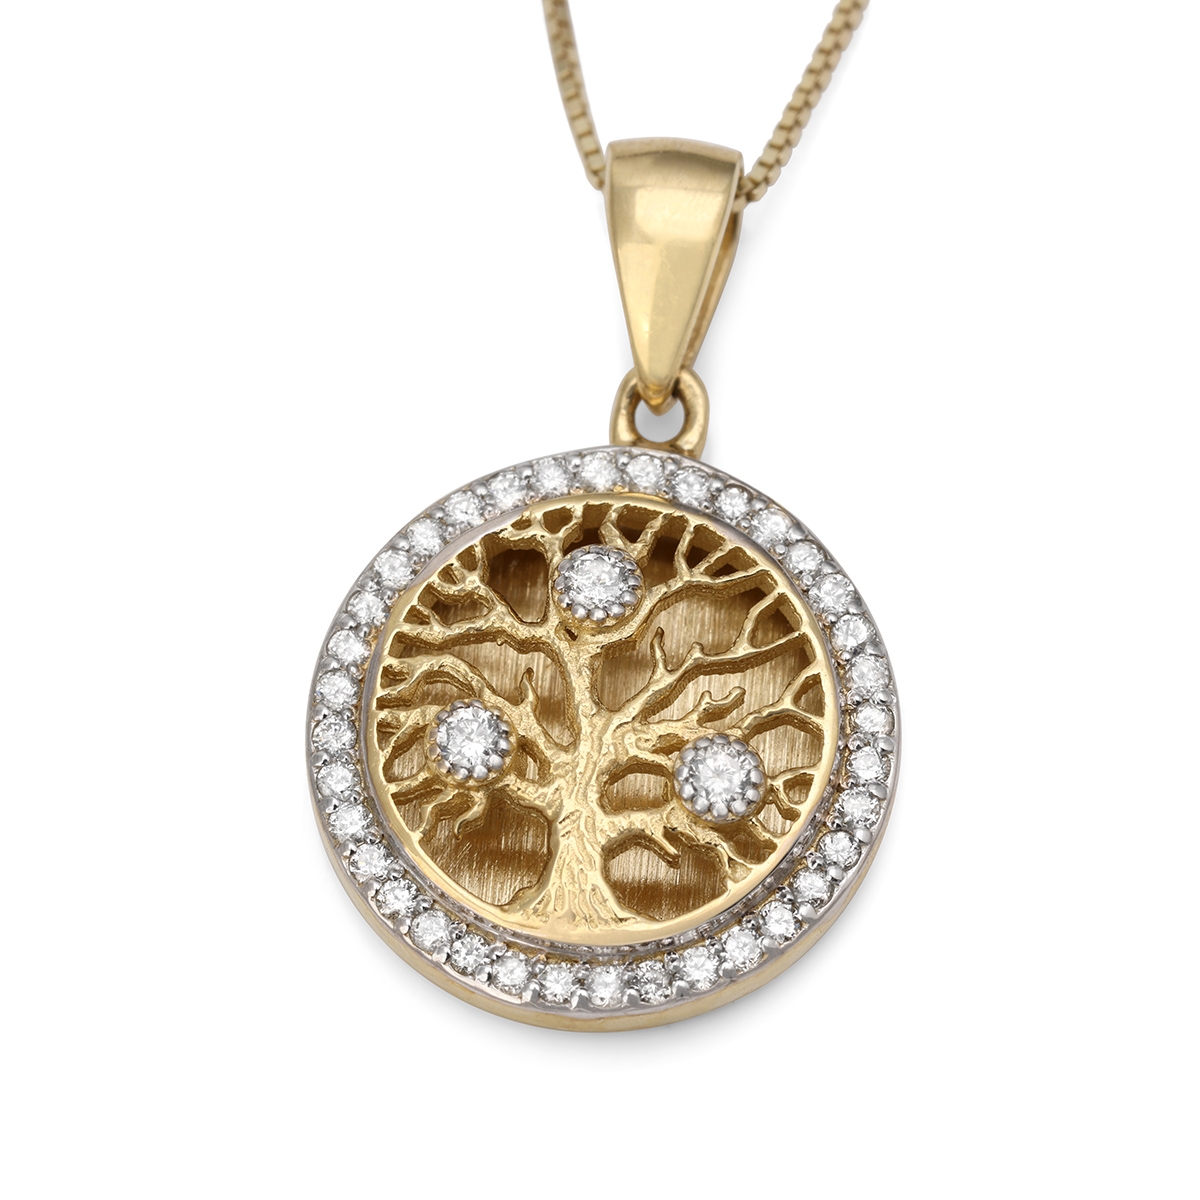 14K Gold Round Tree of Life Pendant Necklace With Diamonds - 1